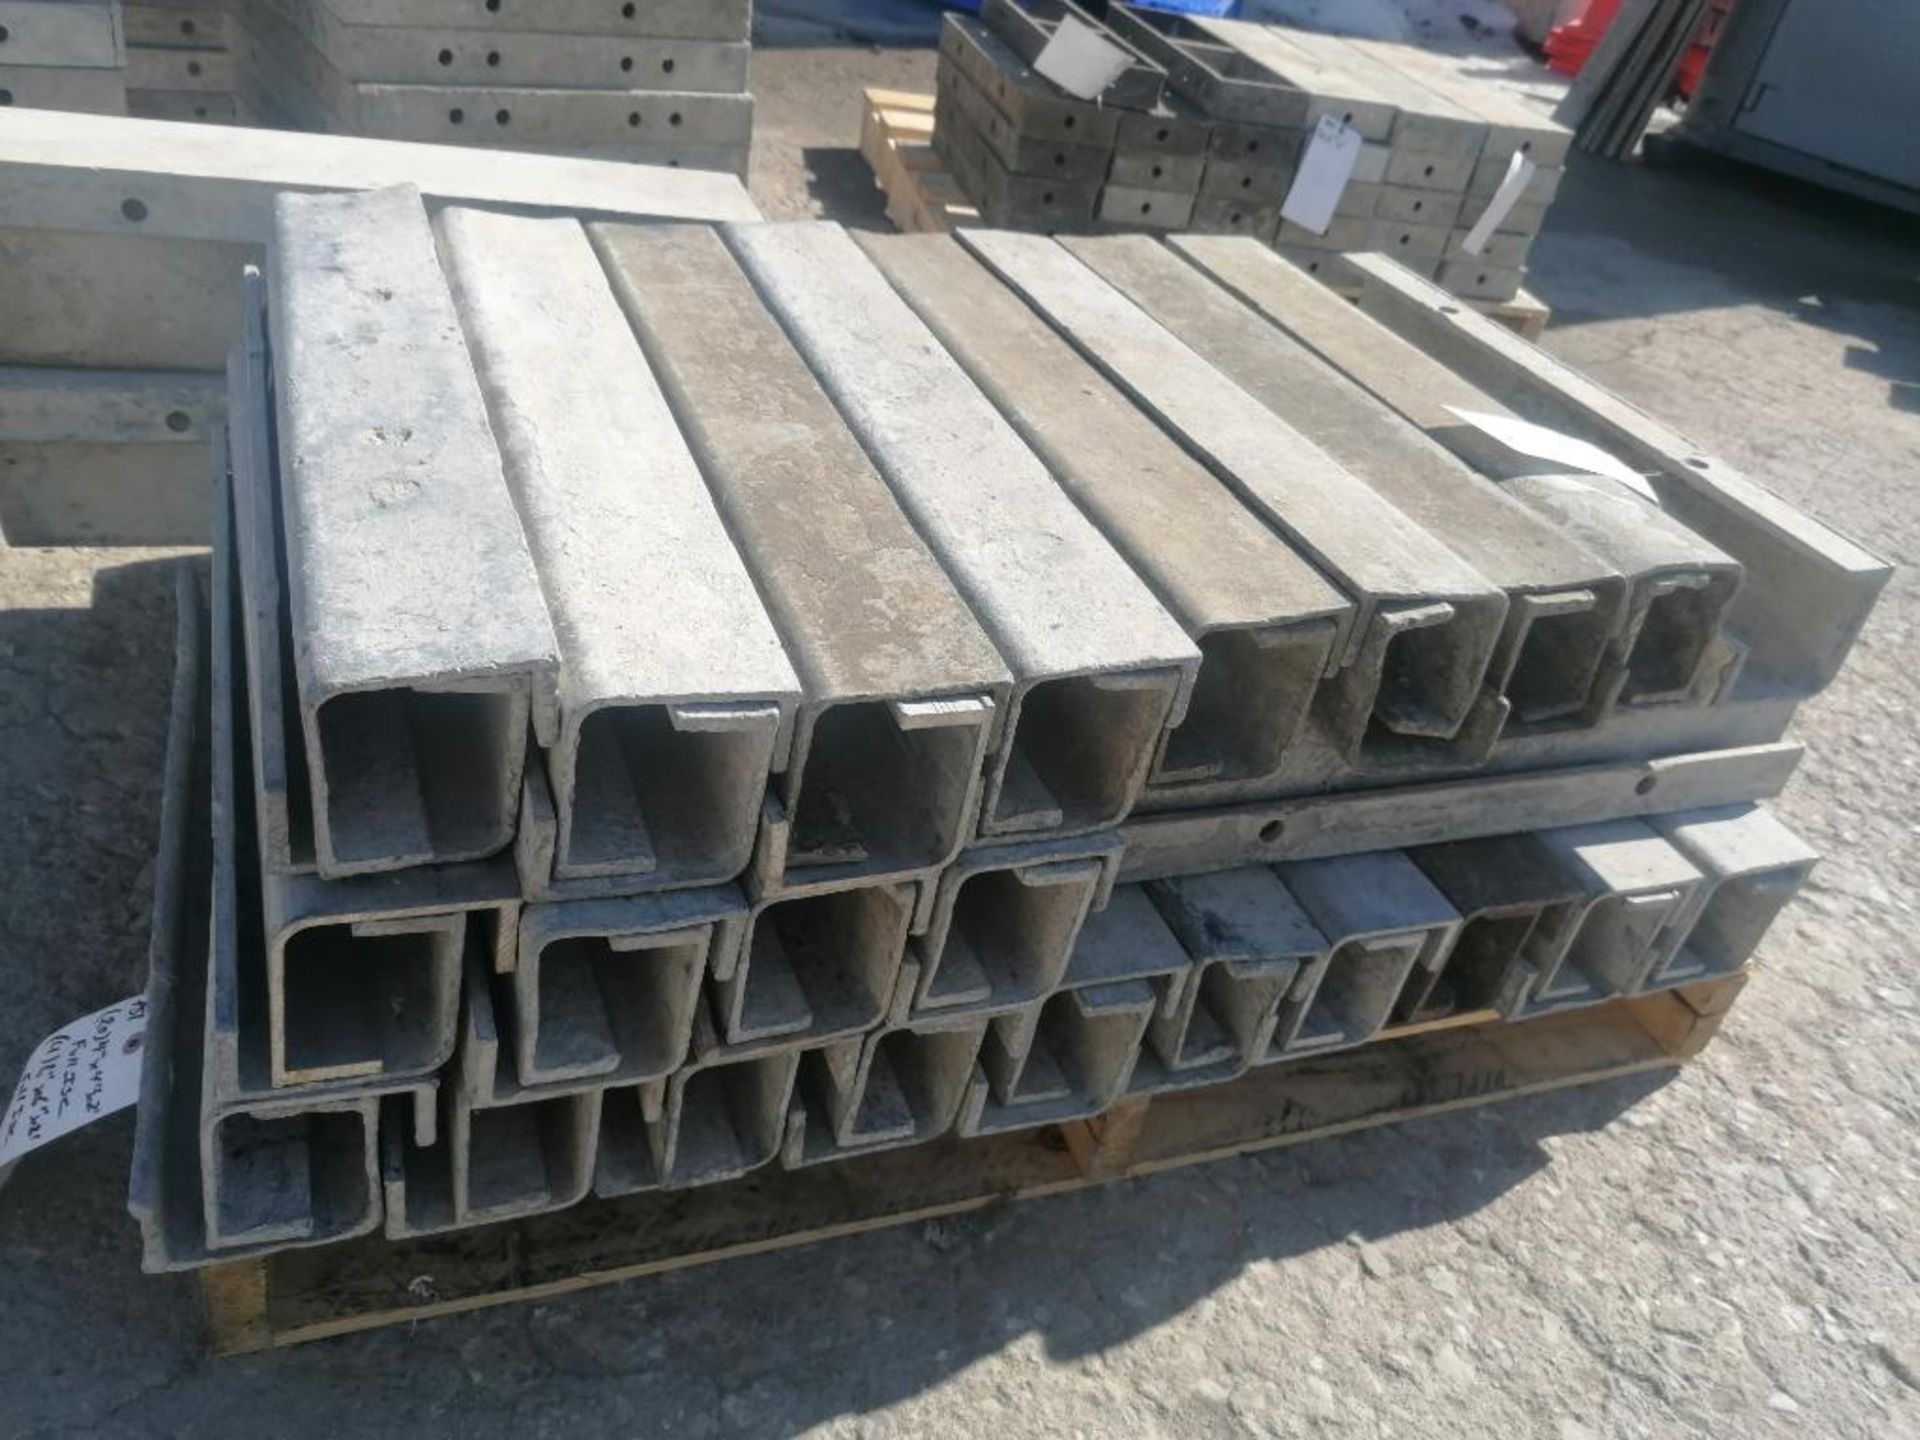 (20) 4" x 4" x 2' & (4) 6" x 6" x 2' Full ISC Wall-Ties Smooth Aluminum Concrete Forms 6-12 Hole